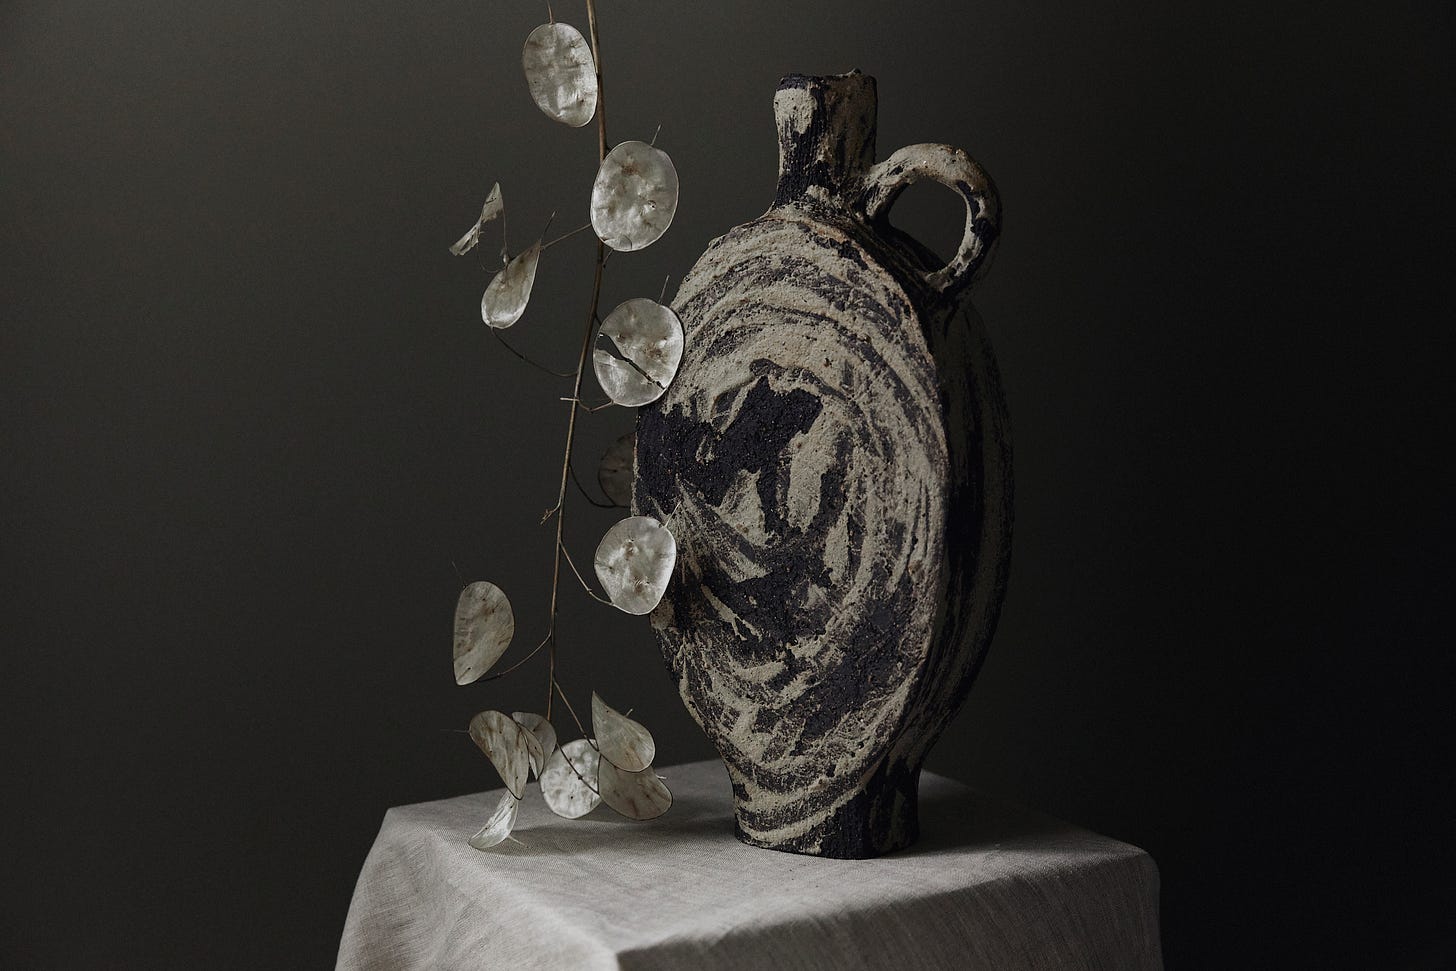 A tall ceramic vessel on a fabric-covered plinth. A stem of winter honesty leans against the vase.